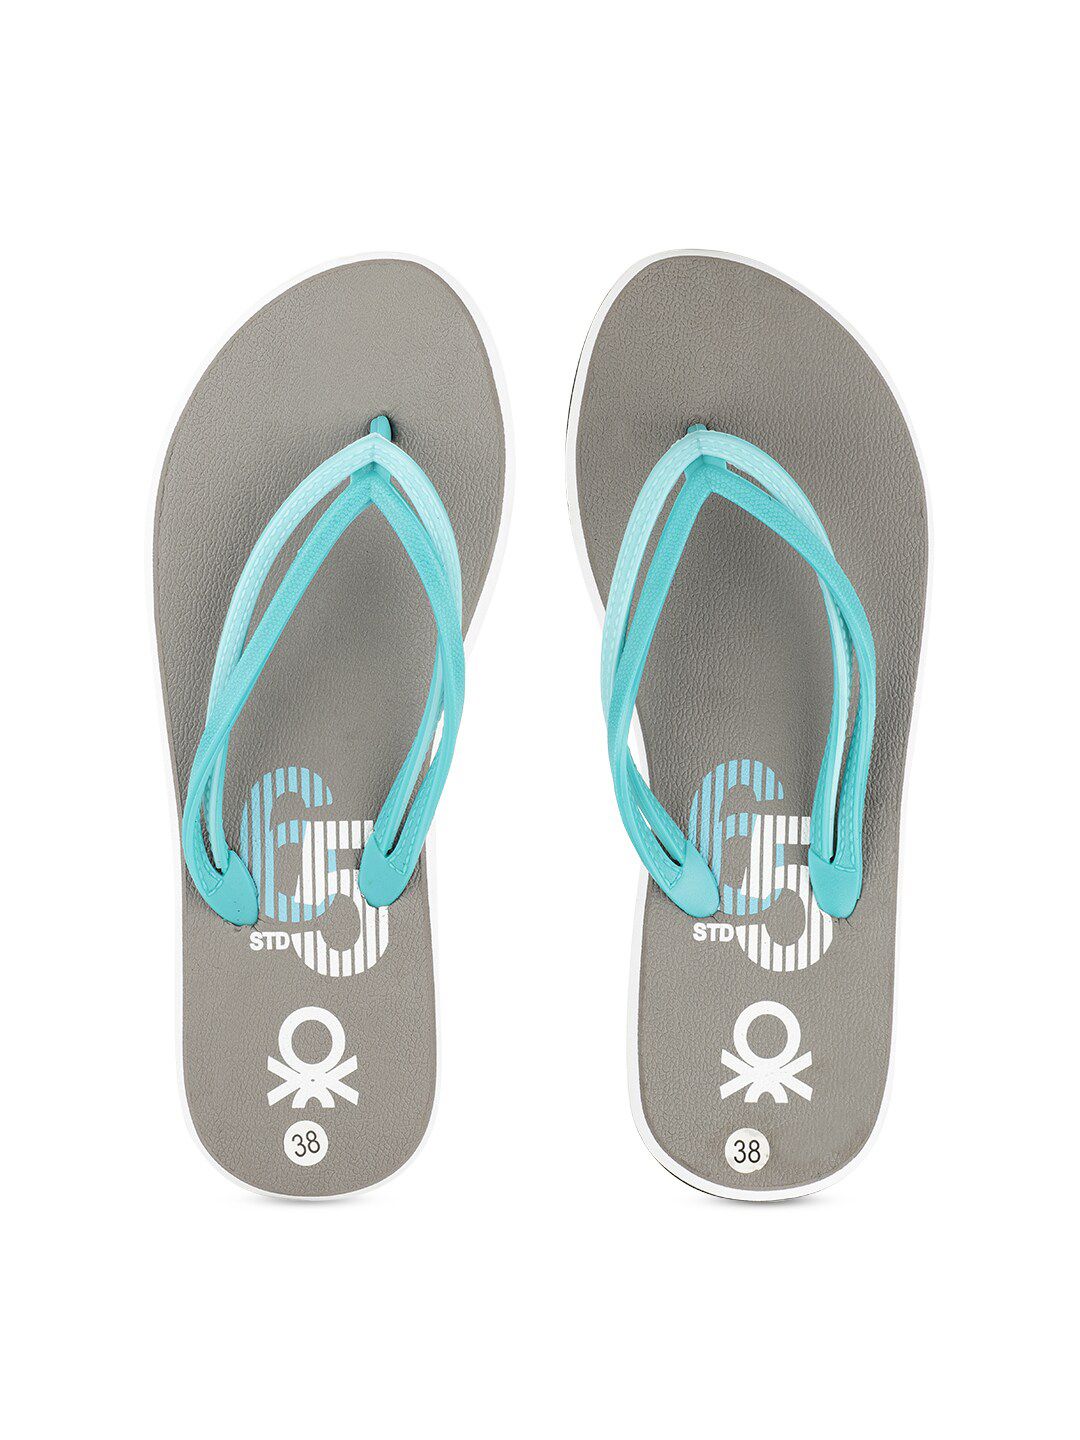 United Colors of Benetton Women Grey & Blue Printed Rubber Thong Flip-Flops Price in India